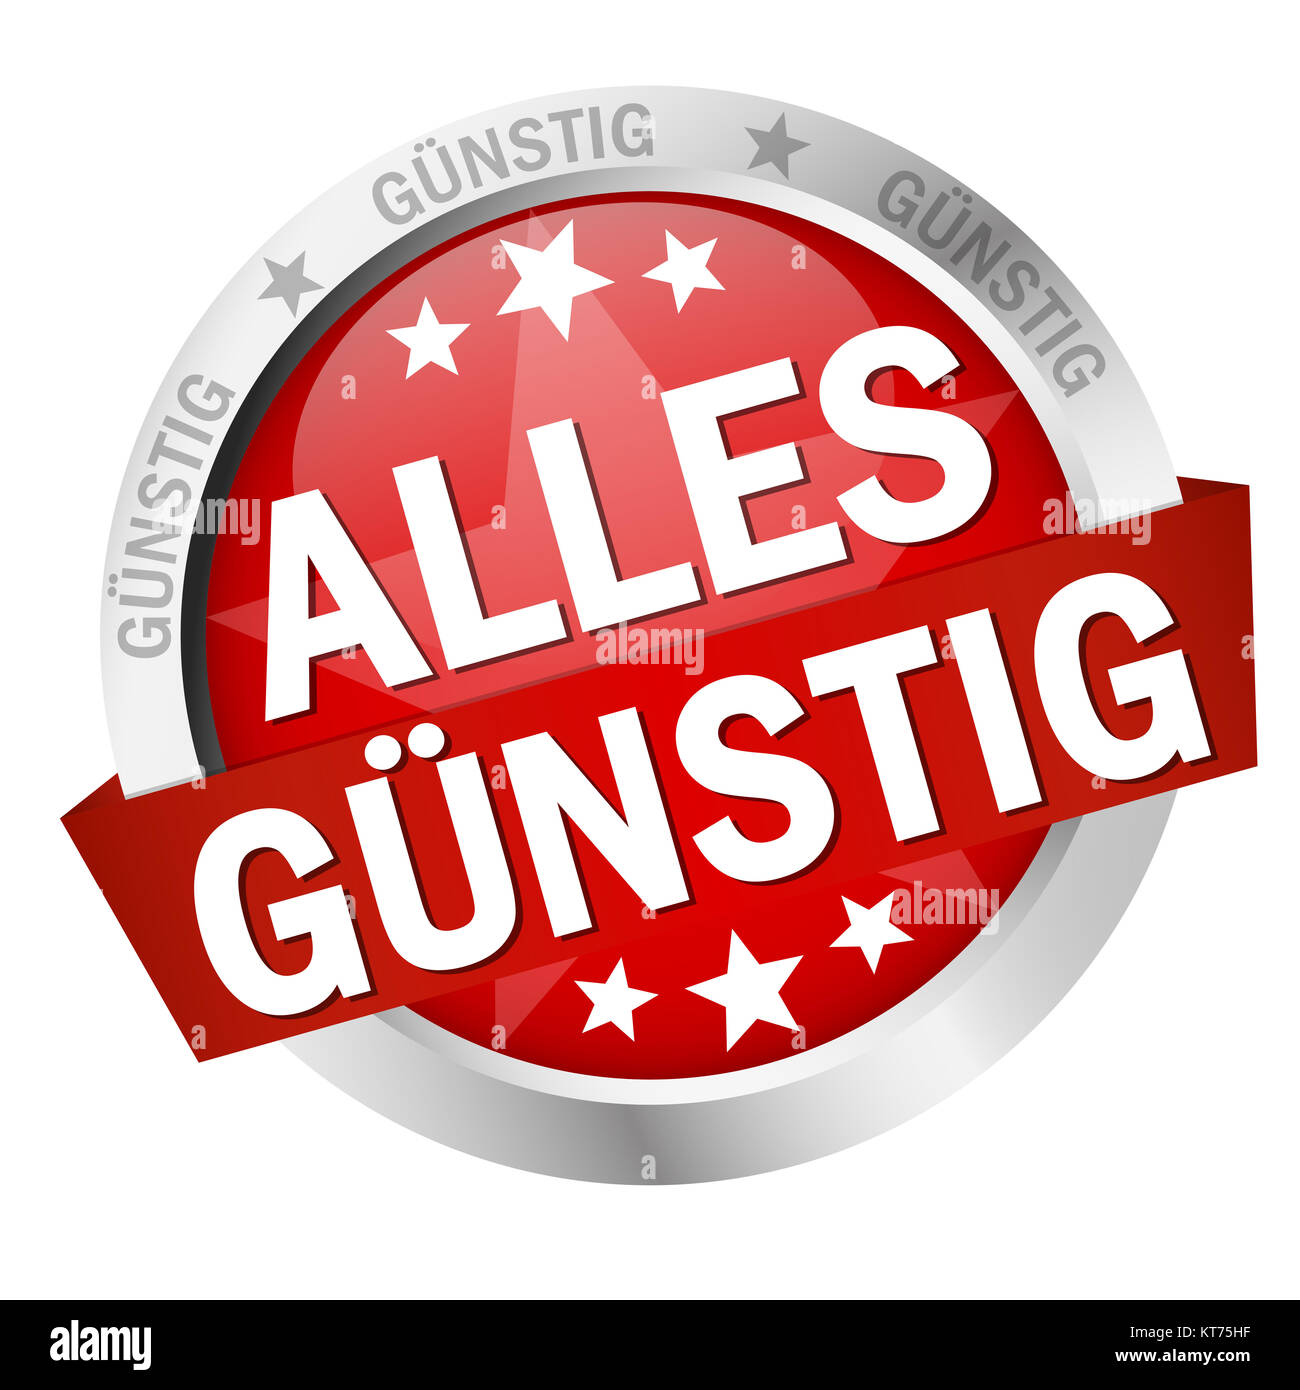 colored button with banner and text Alles günstig Stock Photo